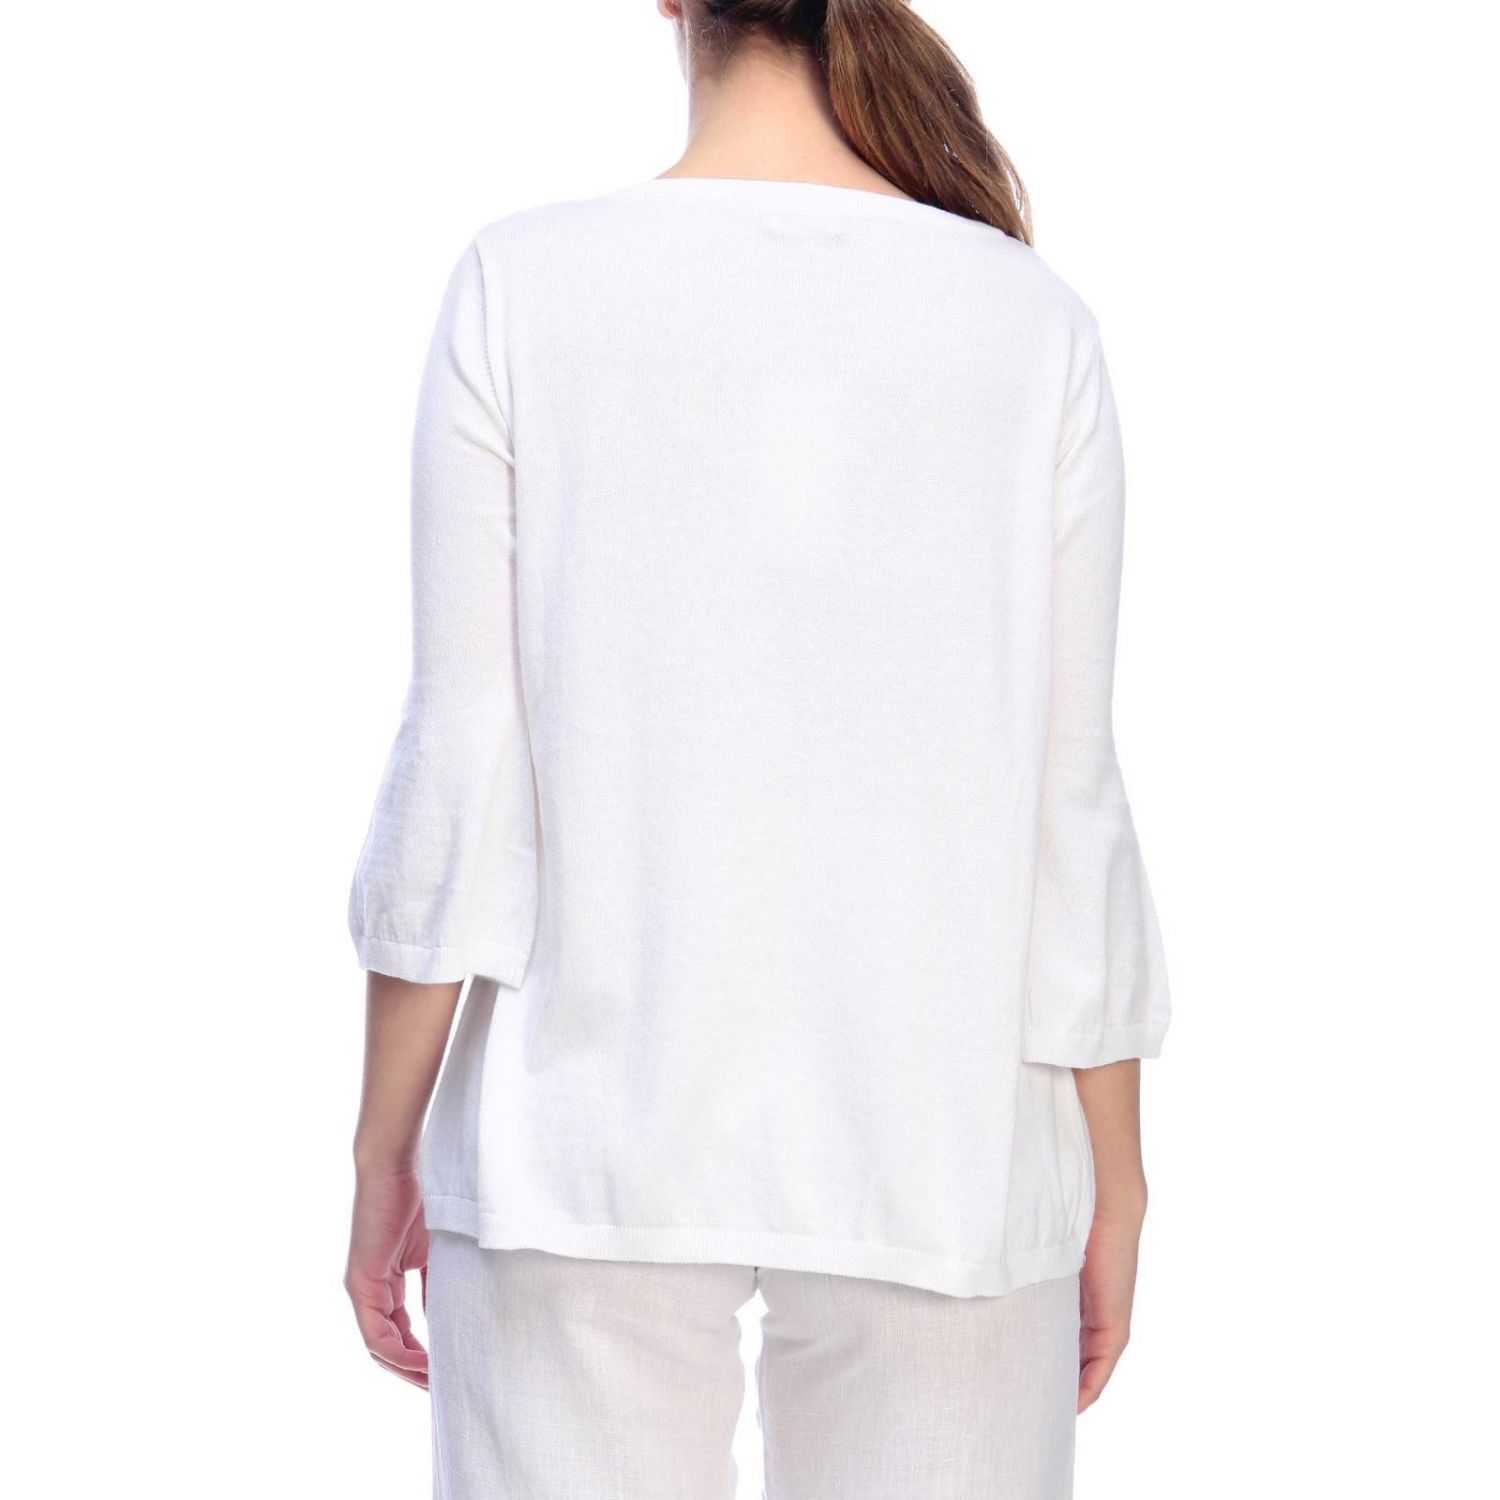 Rossopuro Outlet: Sweater women - White | Sweater Rossopuro RE6304 ...